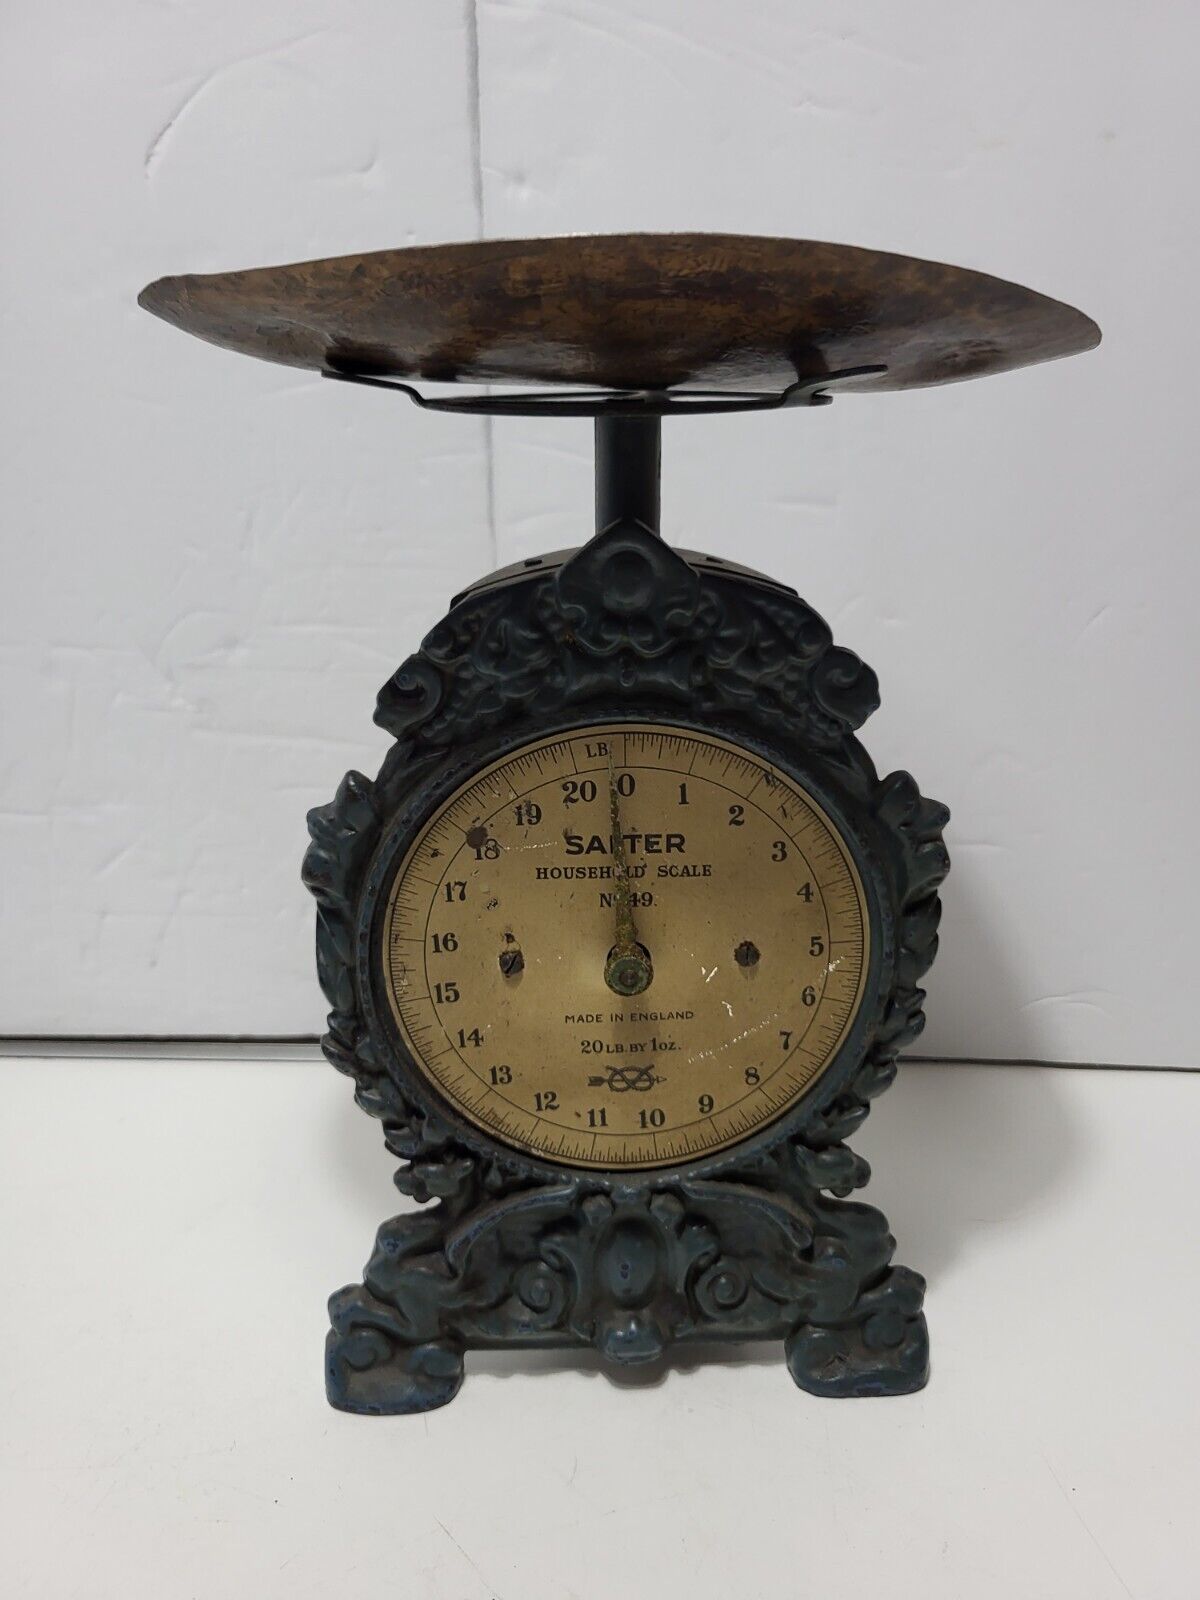 Rare Antique Salter Kitchen Scales Household Scale No. 49